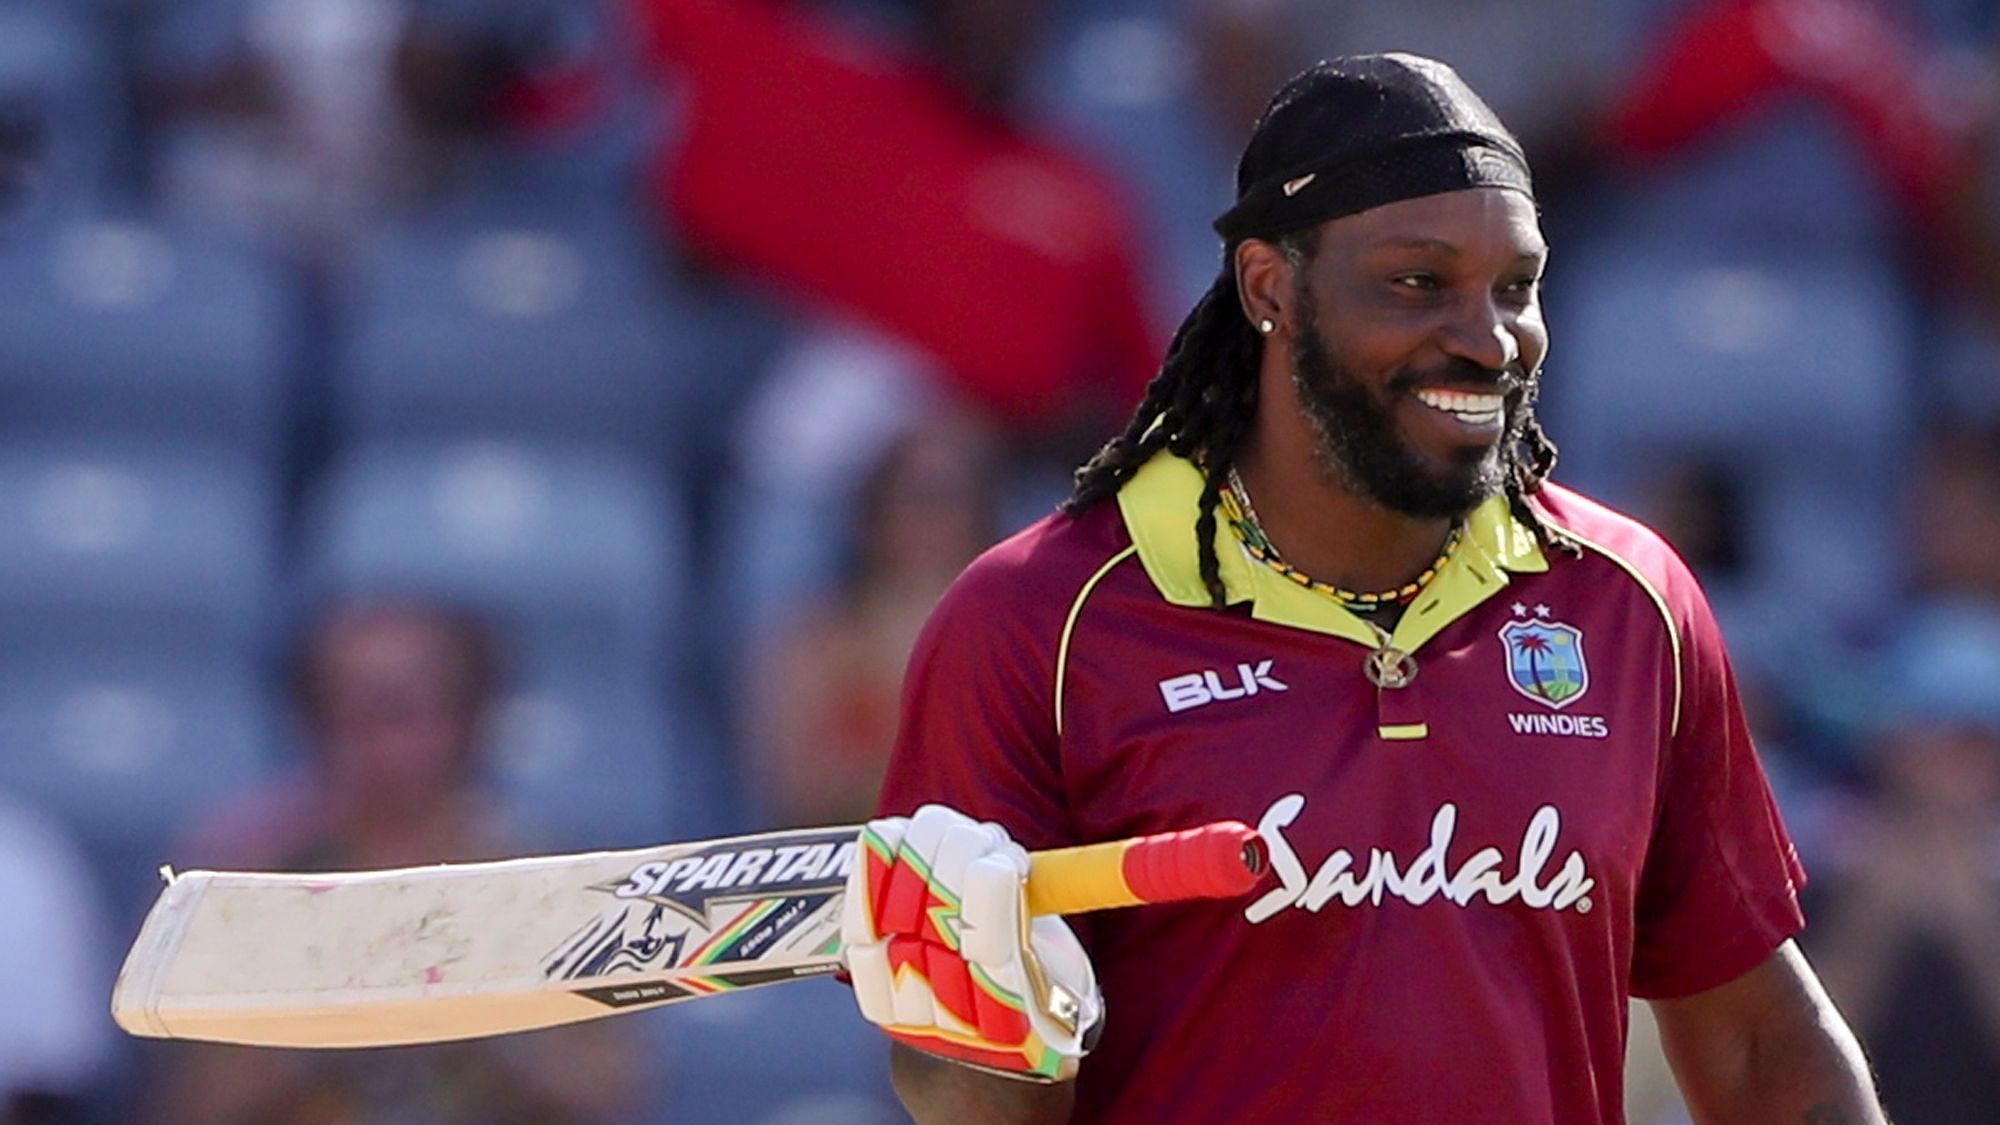 West Indies’ Chris Gayle celebrates after scoring a century against West Indies during the fourth One Day International at the National Stadium in St. George’s, Grenada, Wednesday, Feb. 27, 2019.&nbsp;